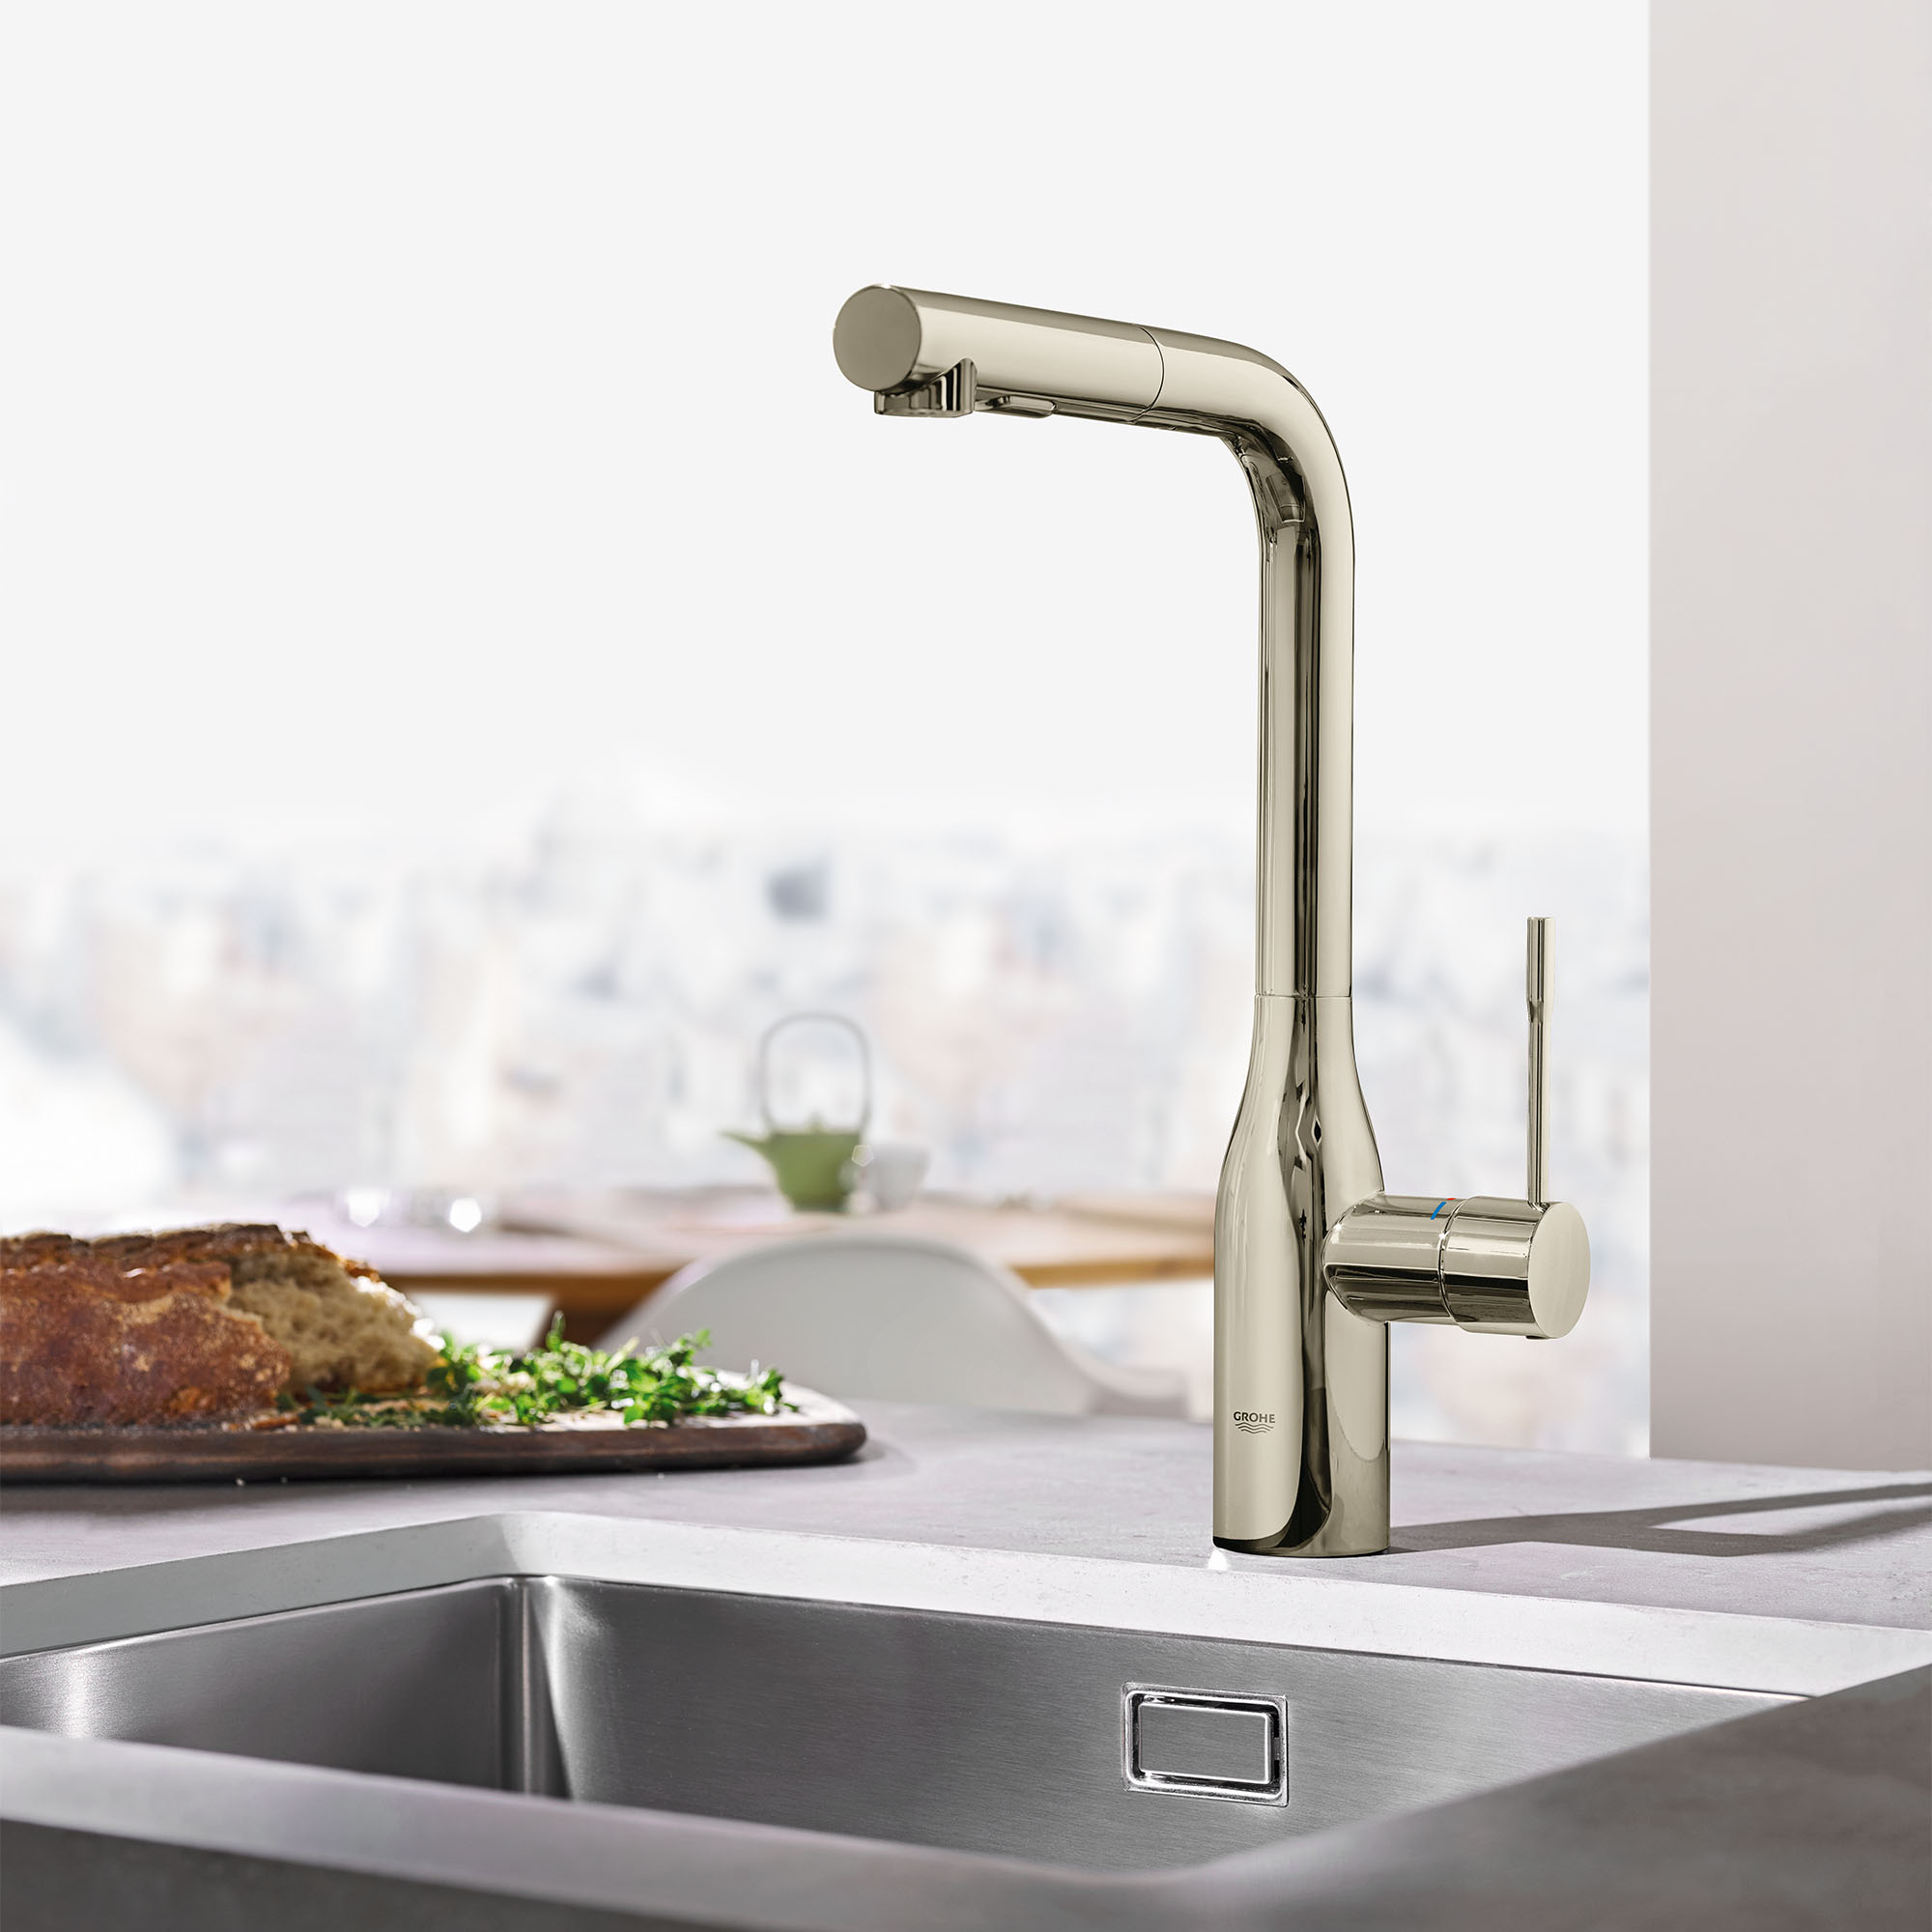 Essence Single-Handle Pull-Out Kitchen Faucet Dual Spray 1.75 GPM (6.6 L/min)